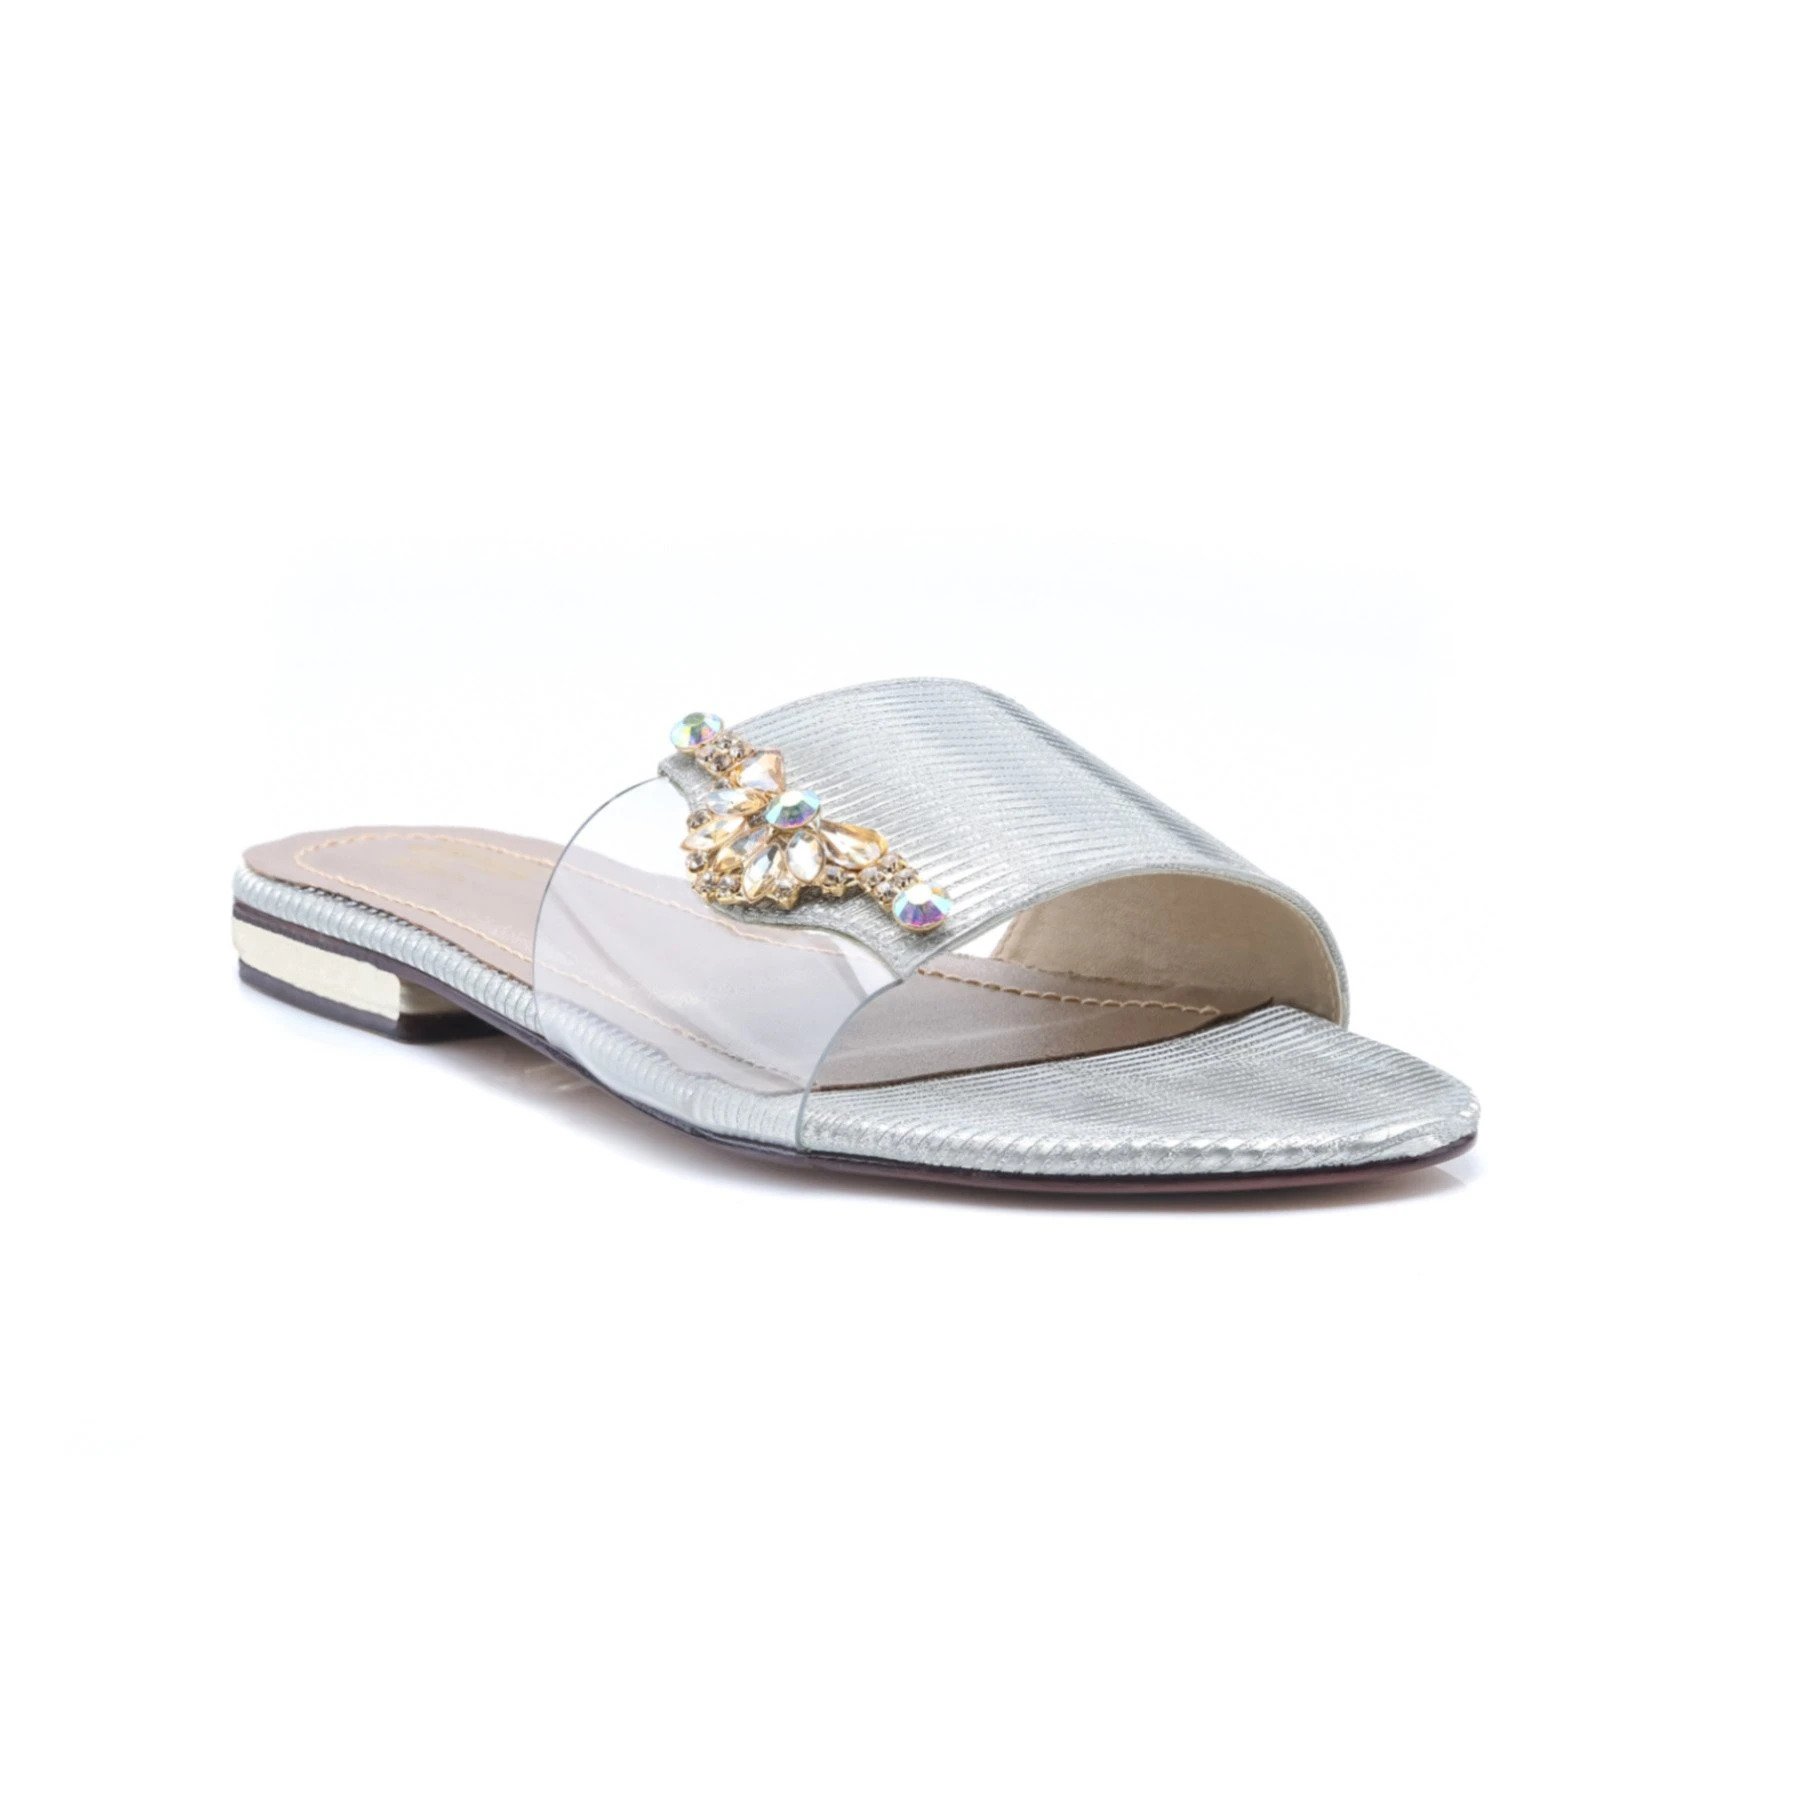 Fawn Color Fancy Slippers FN7258